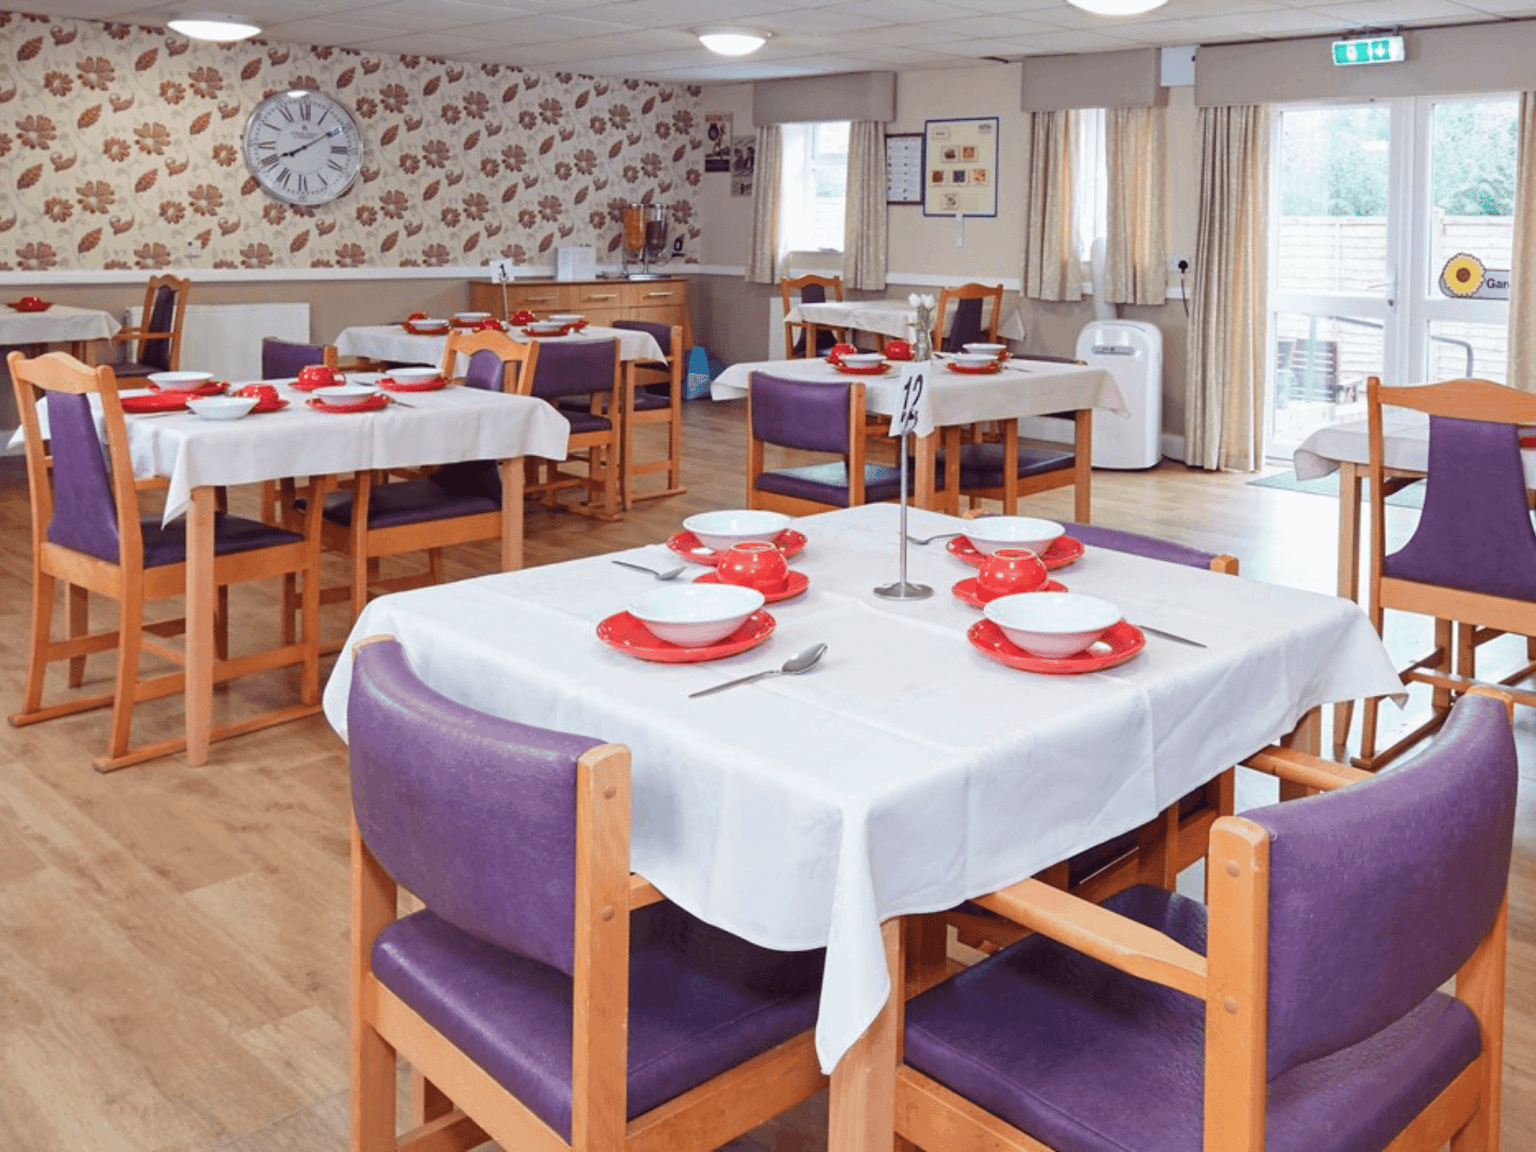 Dining area of Ashcroft care home in Chesterfield